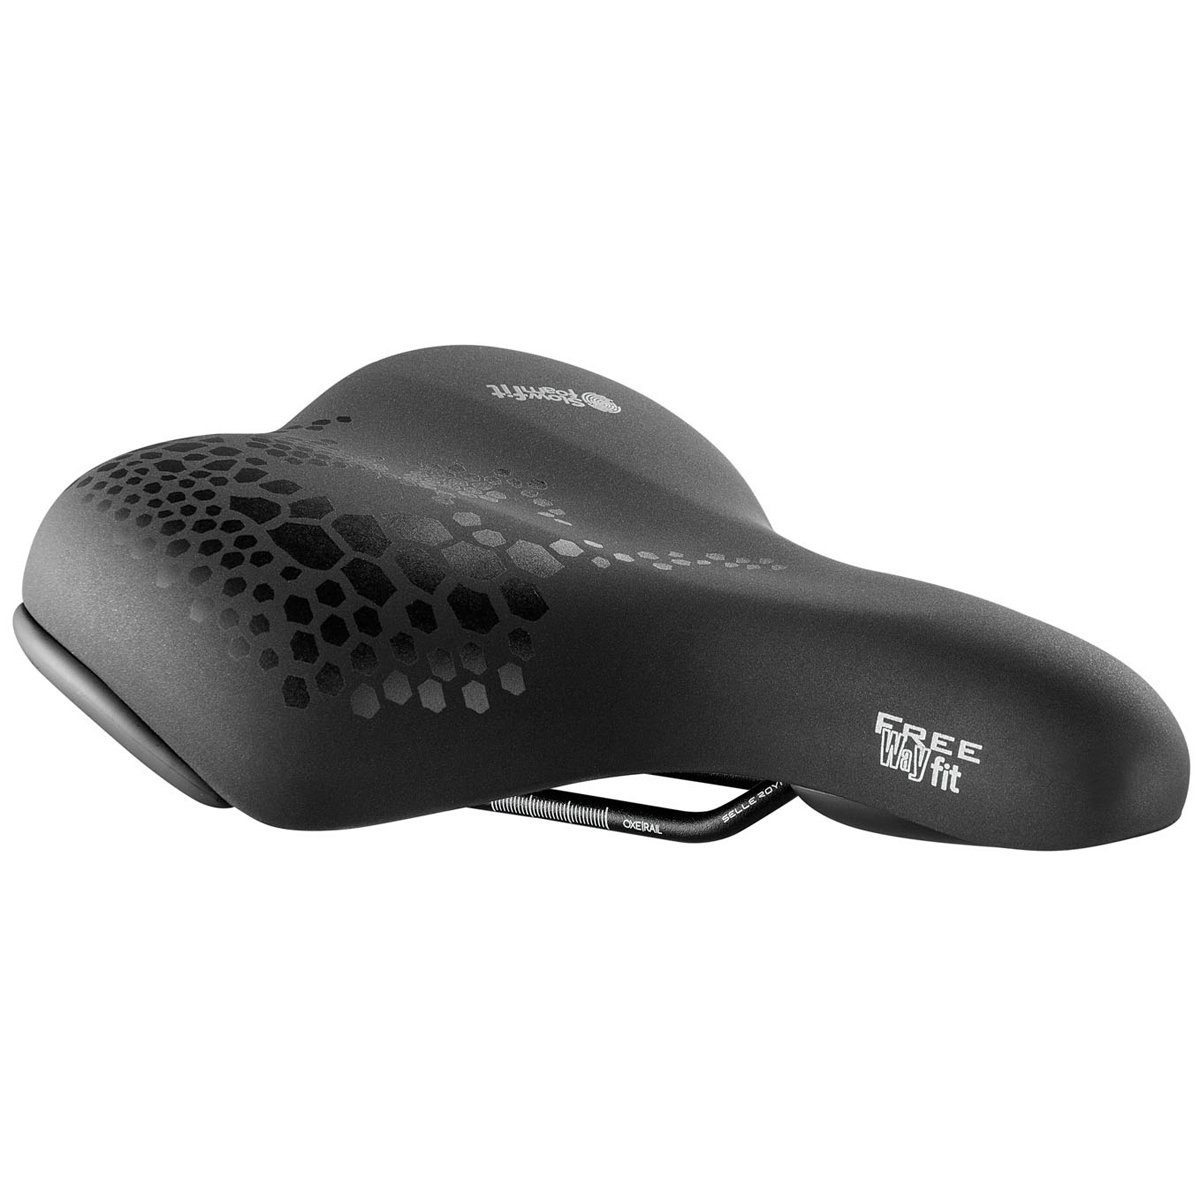  - Selle Royal Freeway Fit Sadel - Relaxed